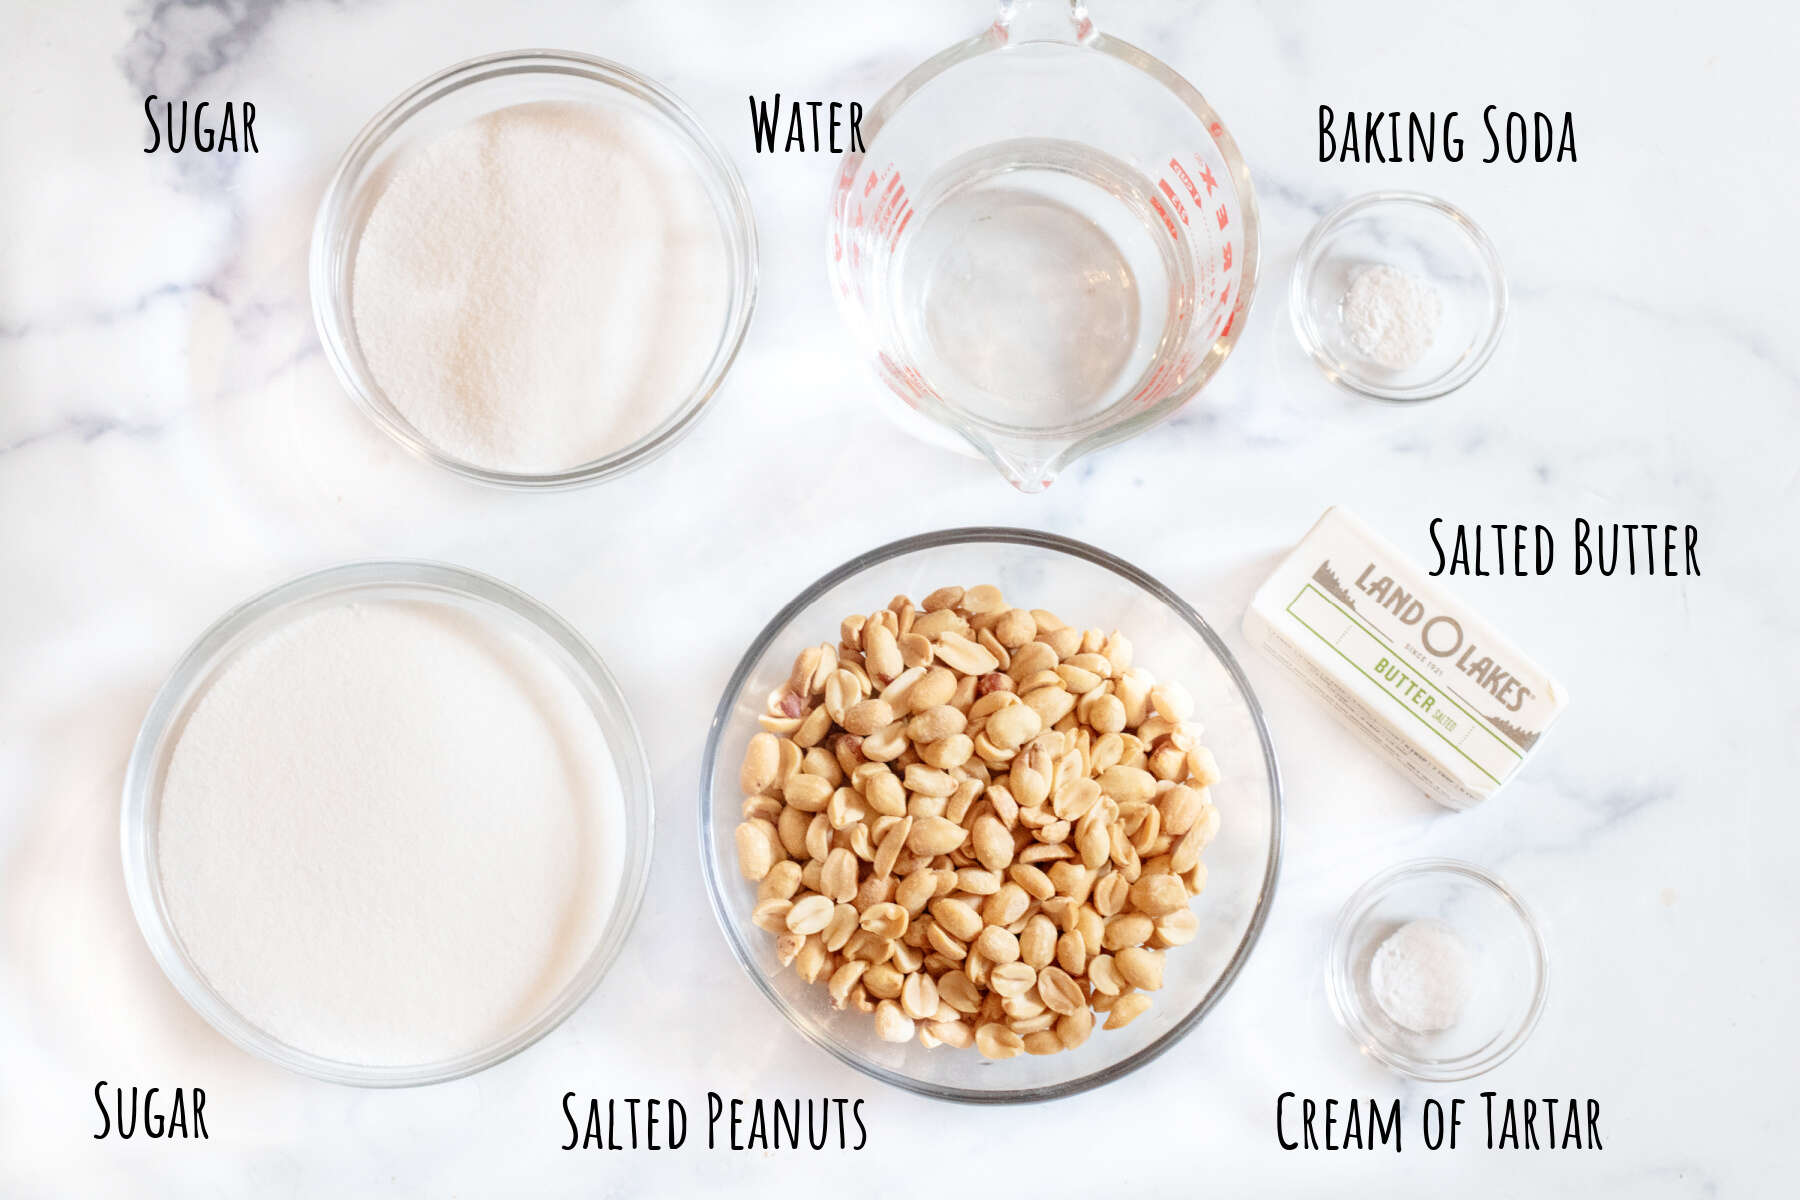 bowls of sugar, peanuts, butter, water, and little bowls of baking soda and cream of tartar.